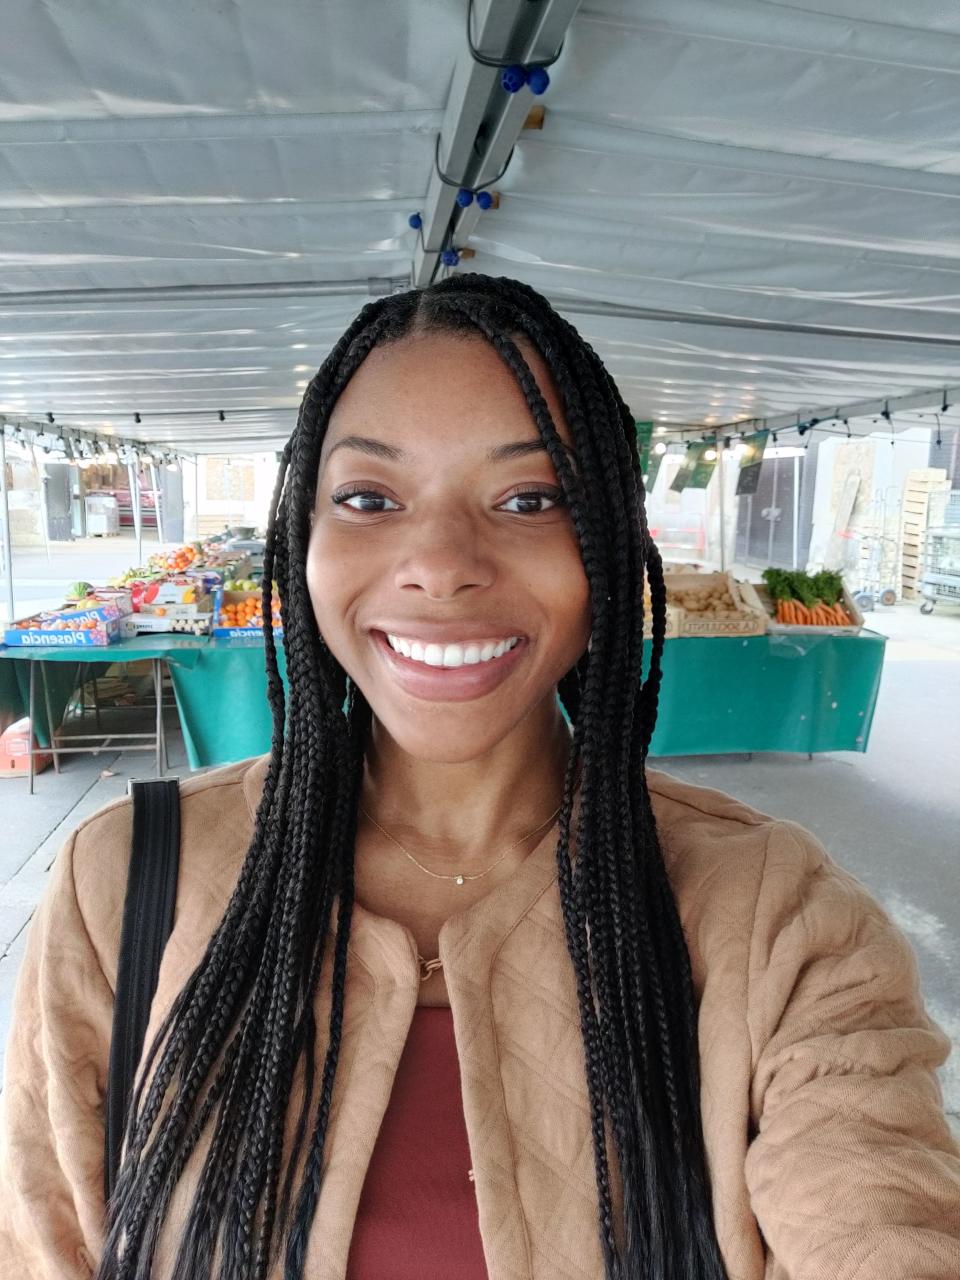 The author smiling in a market area with produce stands in the background